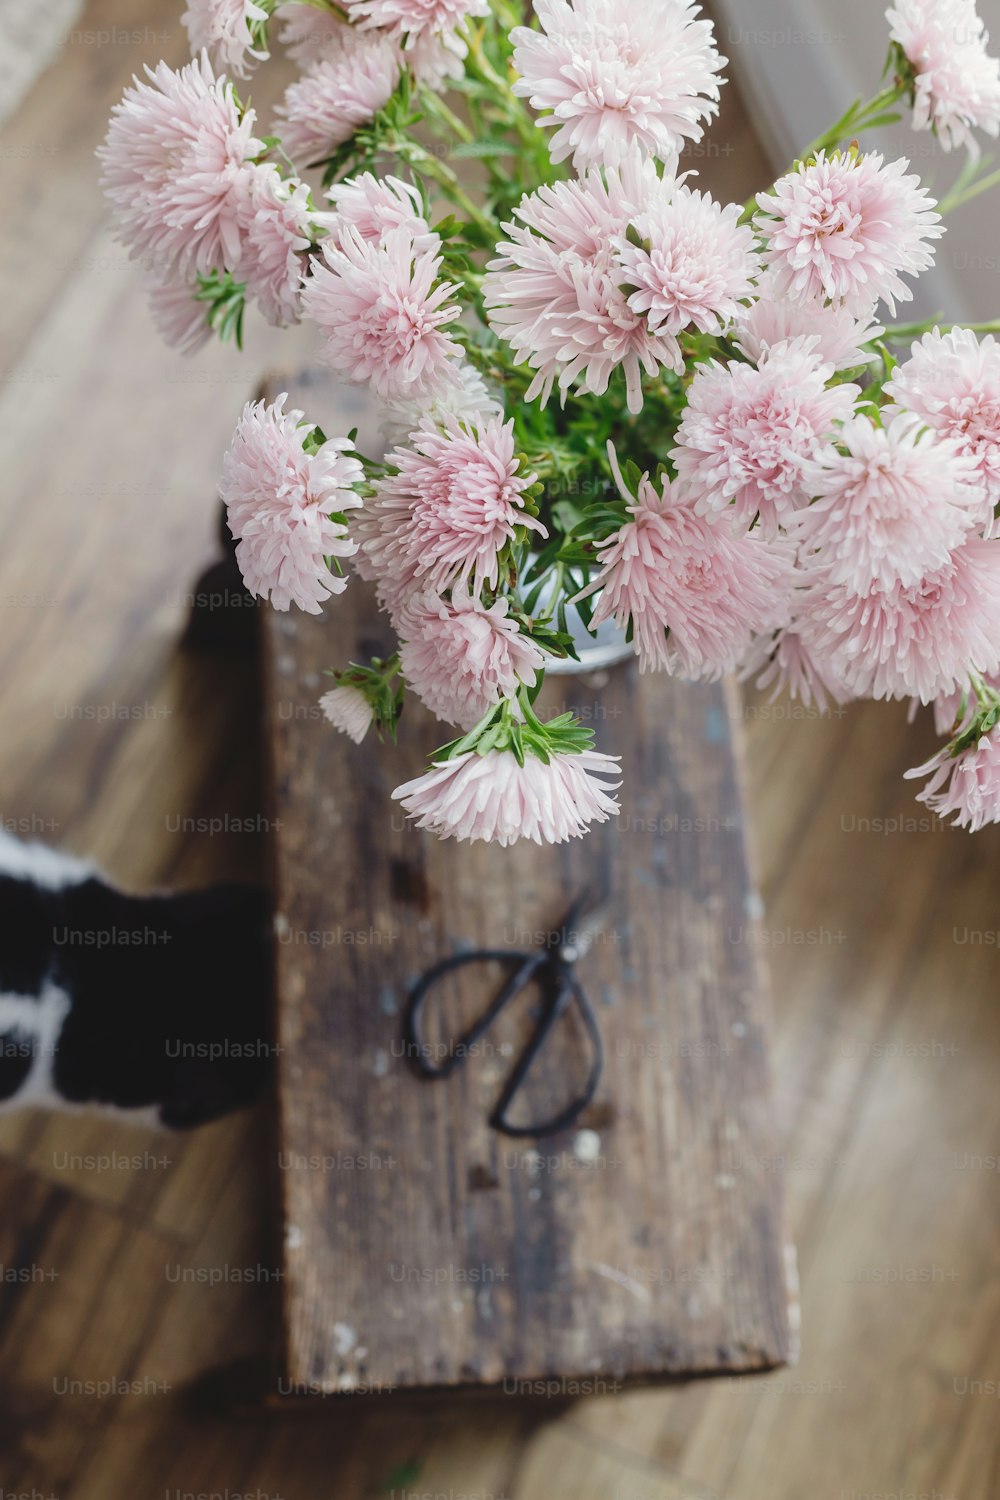 Beautiful autumn flowers, scissors and cute cats on rustic wooden background. Top view. Pink asters flowers and pet, decoration for fall holidays in countryside home. Cozy autumn